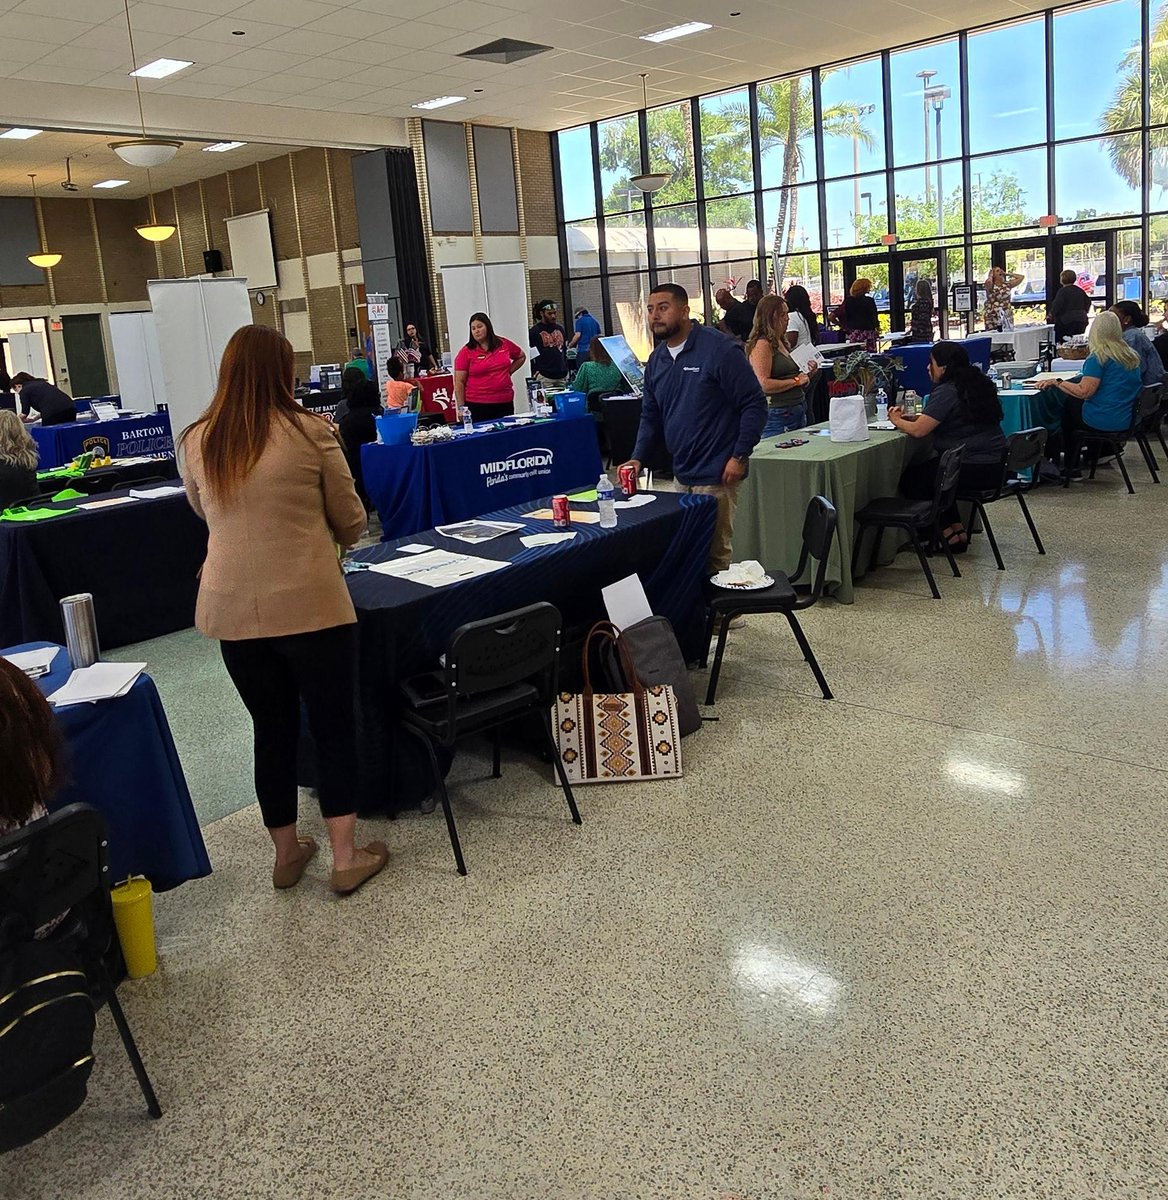 We had a great time at the Nationwide Day of Second Chances Job Fair in #Largo and the 2024 Bartow Chamber Job and Career Fair in #Lakeland! Thank you to all of the job seekers who came out to see us yesterday, we enjoyed meeting every one of you. 👋 #JobFair #NowHiring